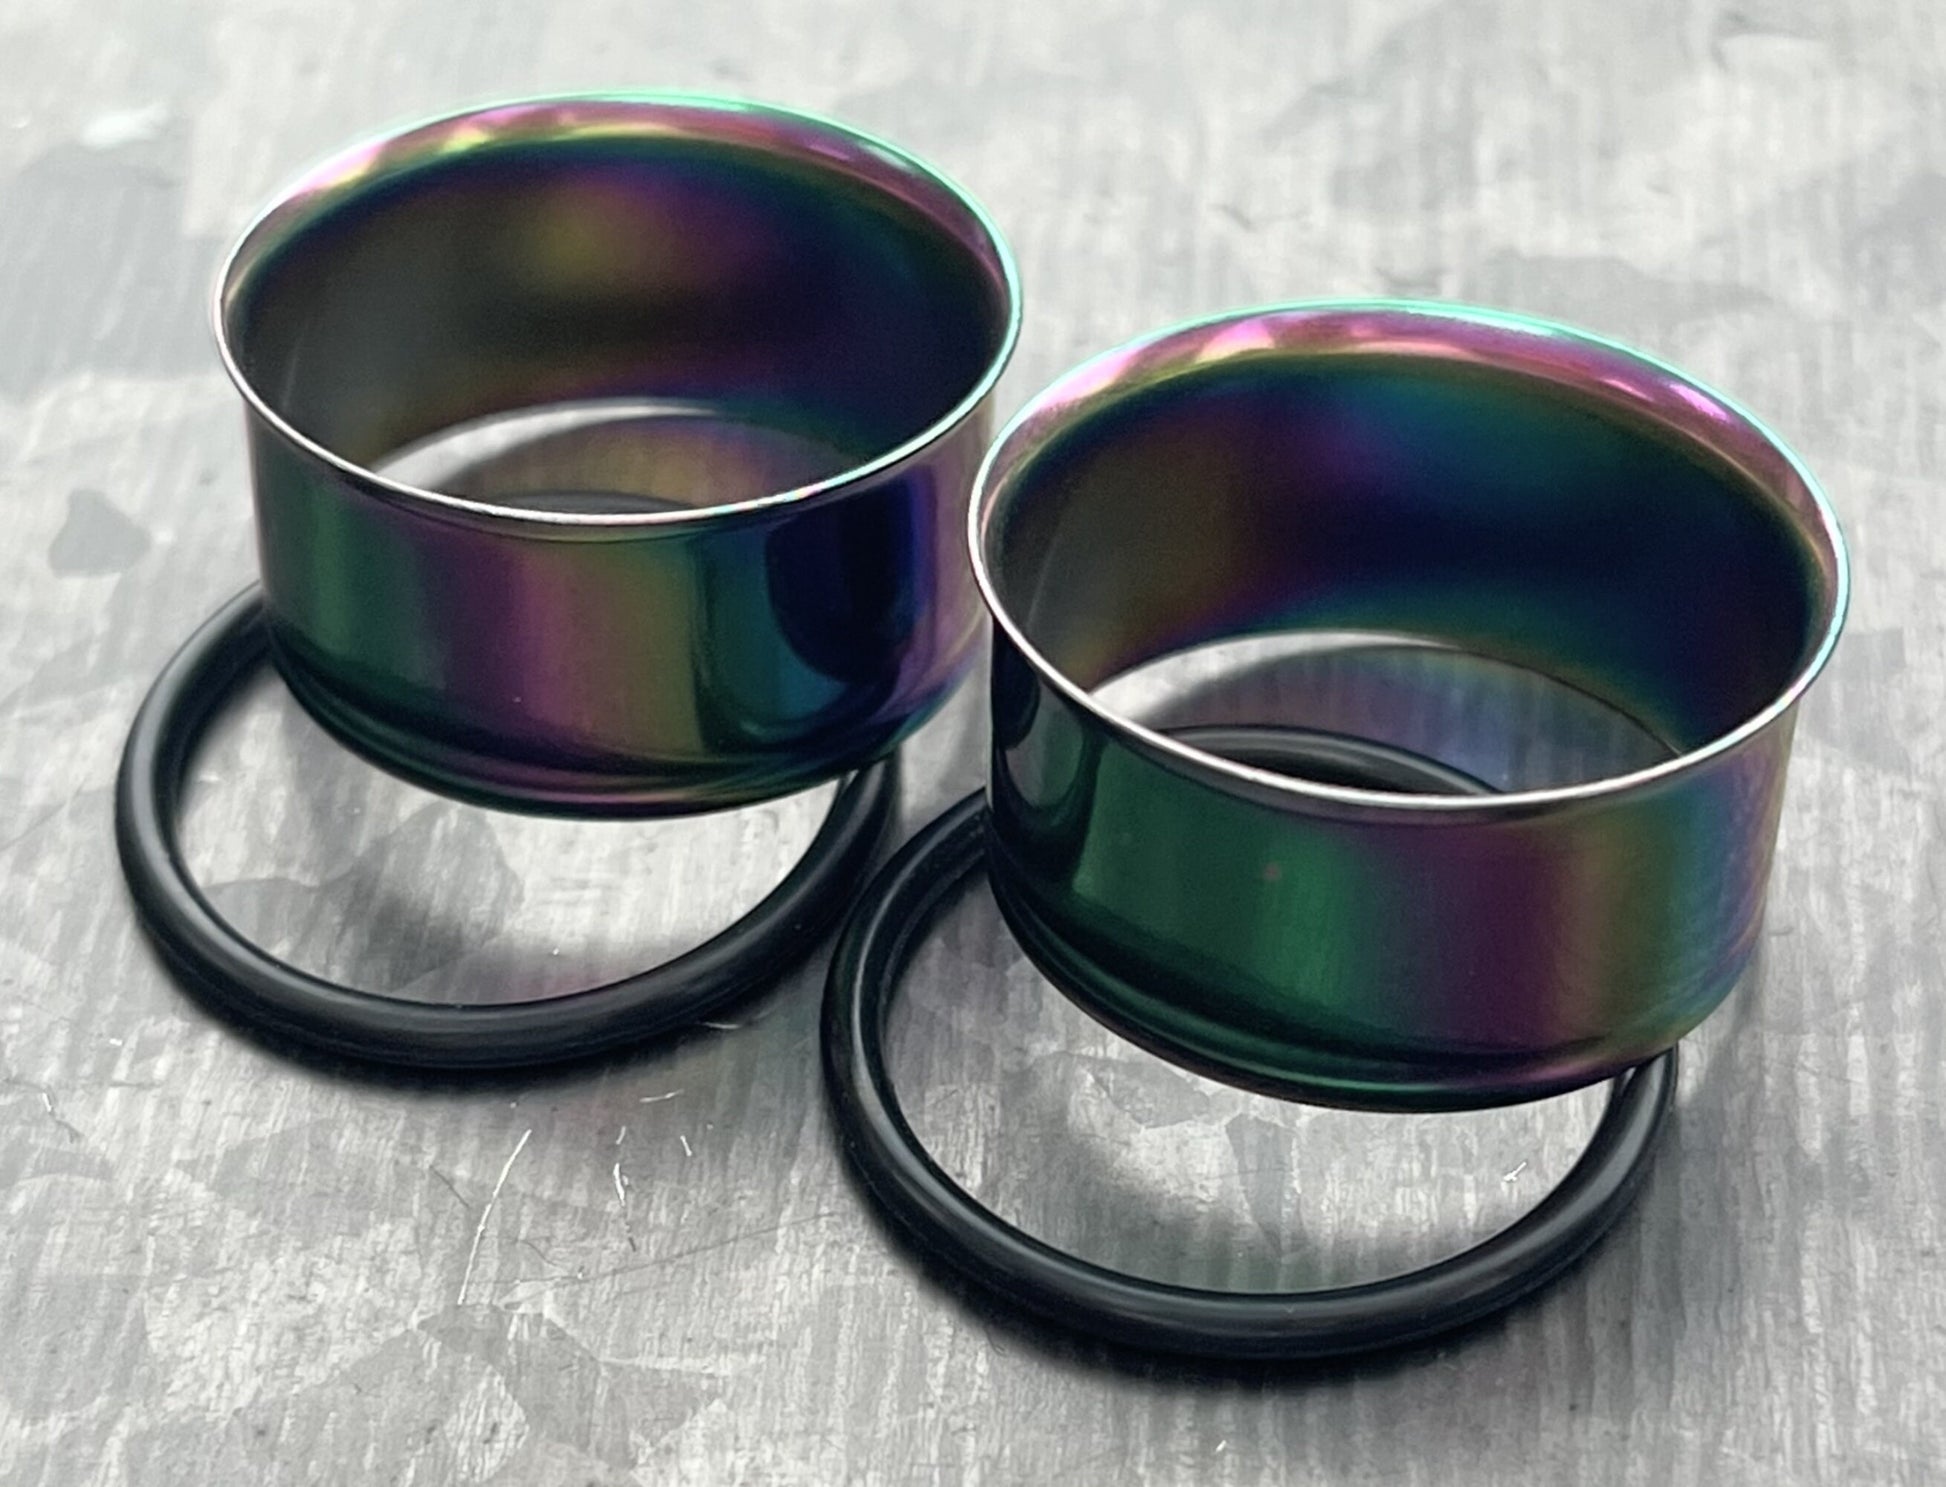 PAIR of Unique Rainbow PVD Plated 316L Surgical Steel Single Flare Tunnels Plugs with O-Rings - Gauges 10g (2.5mm) thru 1" (25mm) available!